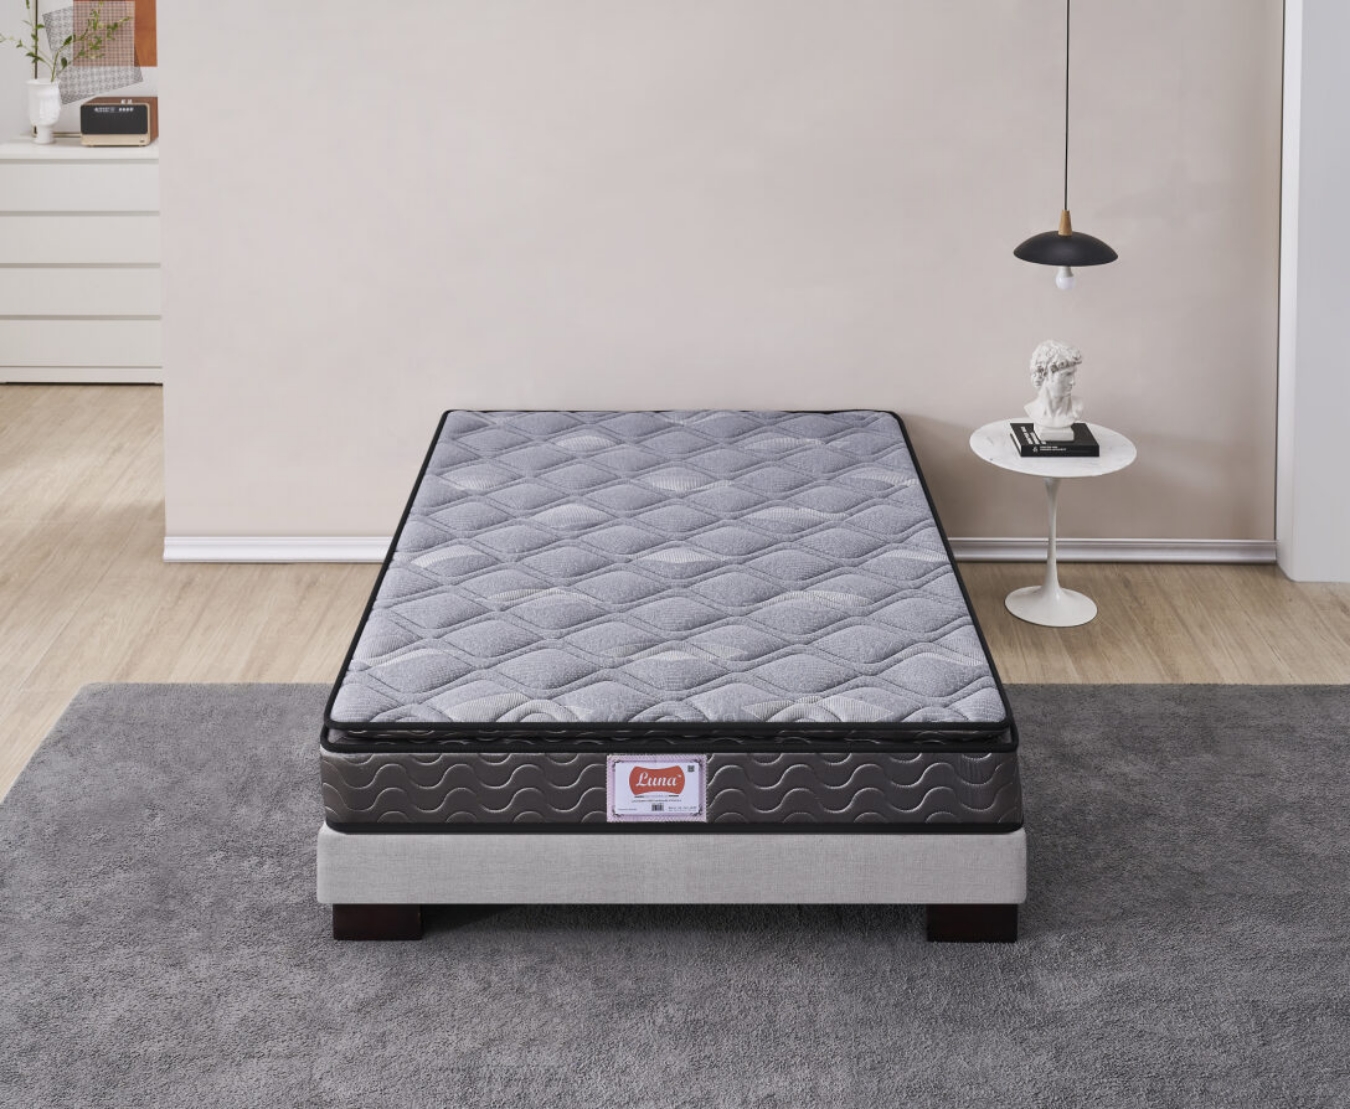 LUNA 1680（FR） PILLOW TOP CONTINUOUS SPRING MATTRESS KING SINGLE is suitable for those looking for a good quality mattress on a smaller budget. With a 20 cm height continuous spring system. 